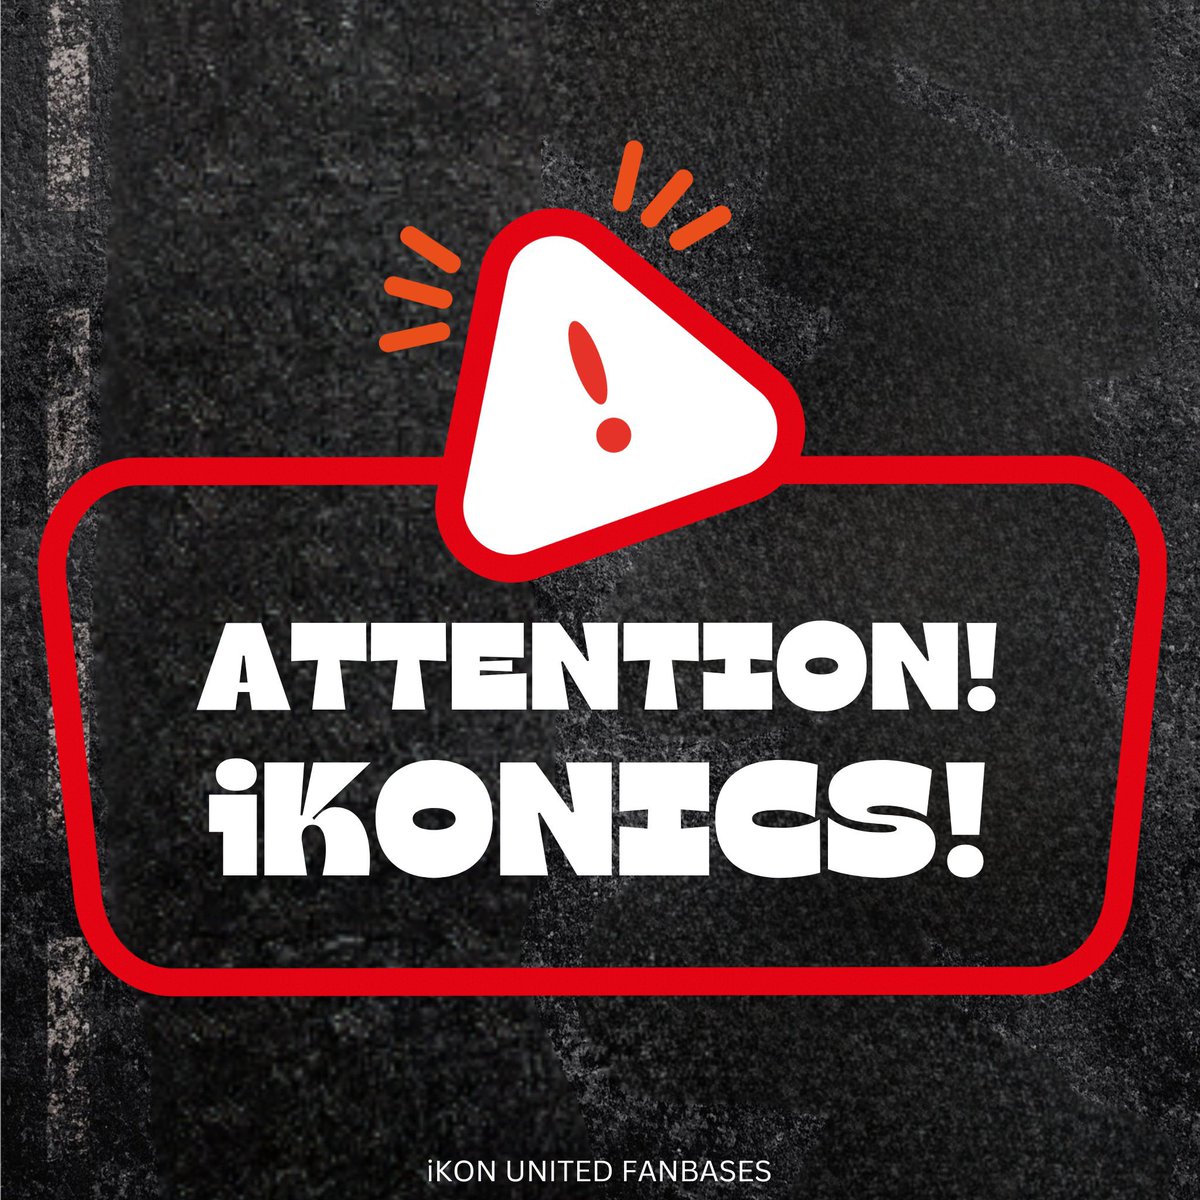 [📢] iKONICs, we have updated the Google Docs with our MASS EMAIL template to HYBE, kindly check the second page of the document. 🔗docs.google.com/document/d/1NP… We admire our unity, from the beginning until now. Let's keep going, iKONICs!🖖 #RESPECTiKON #iKON #아이콘